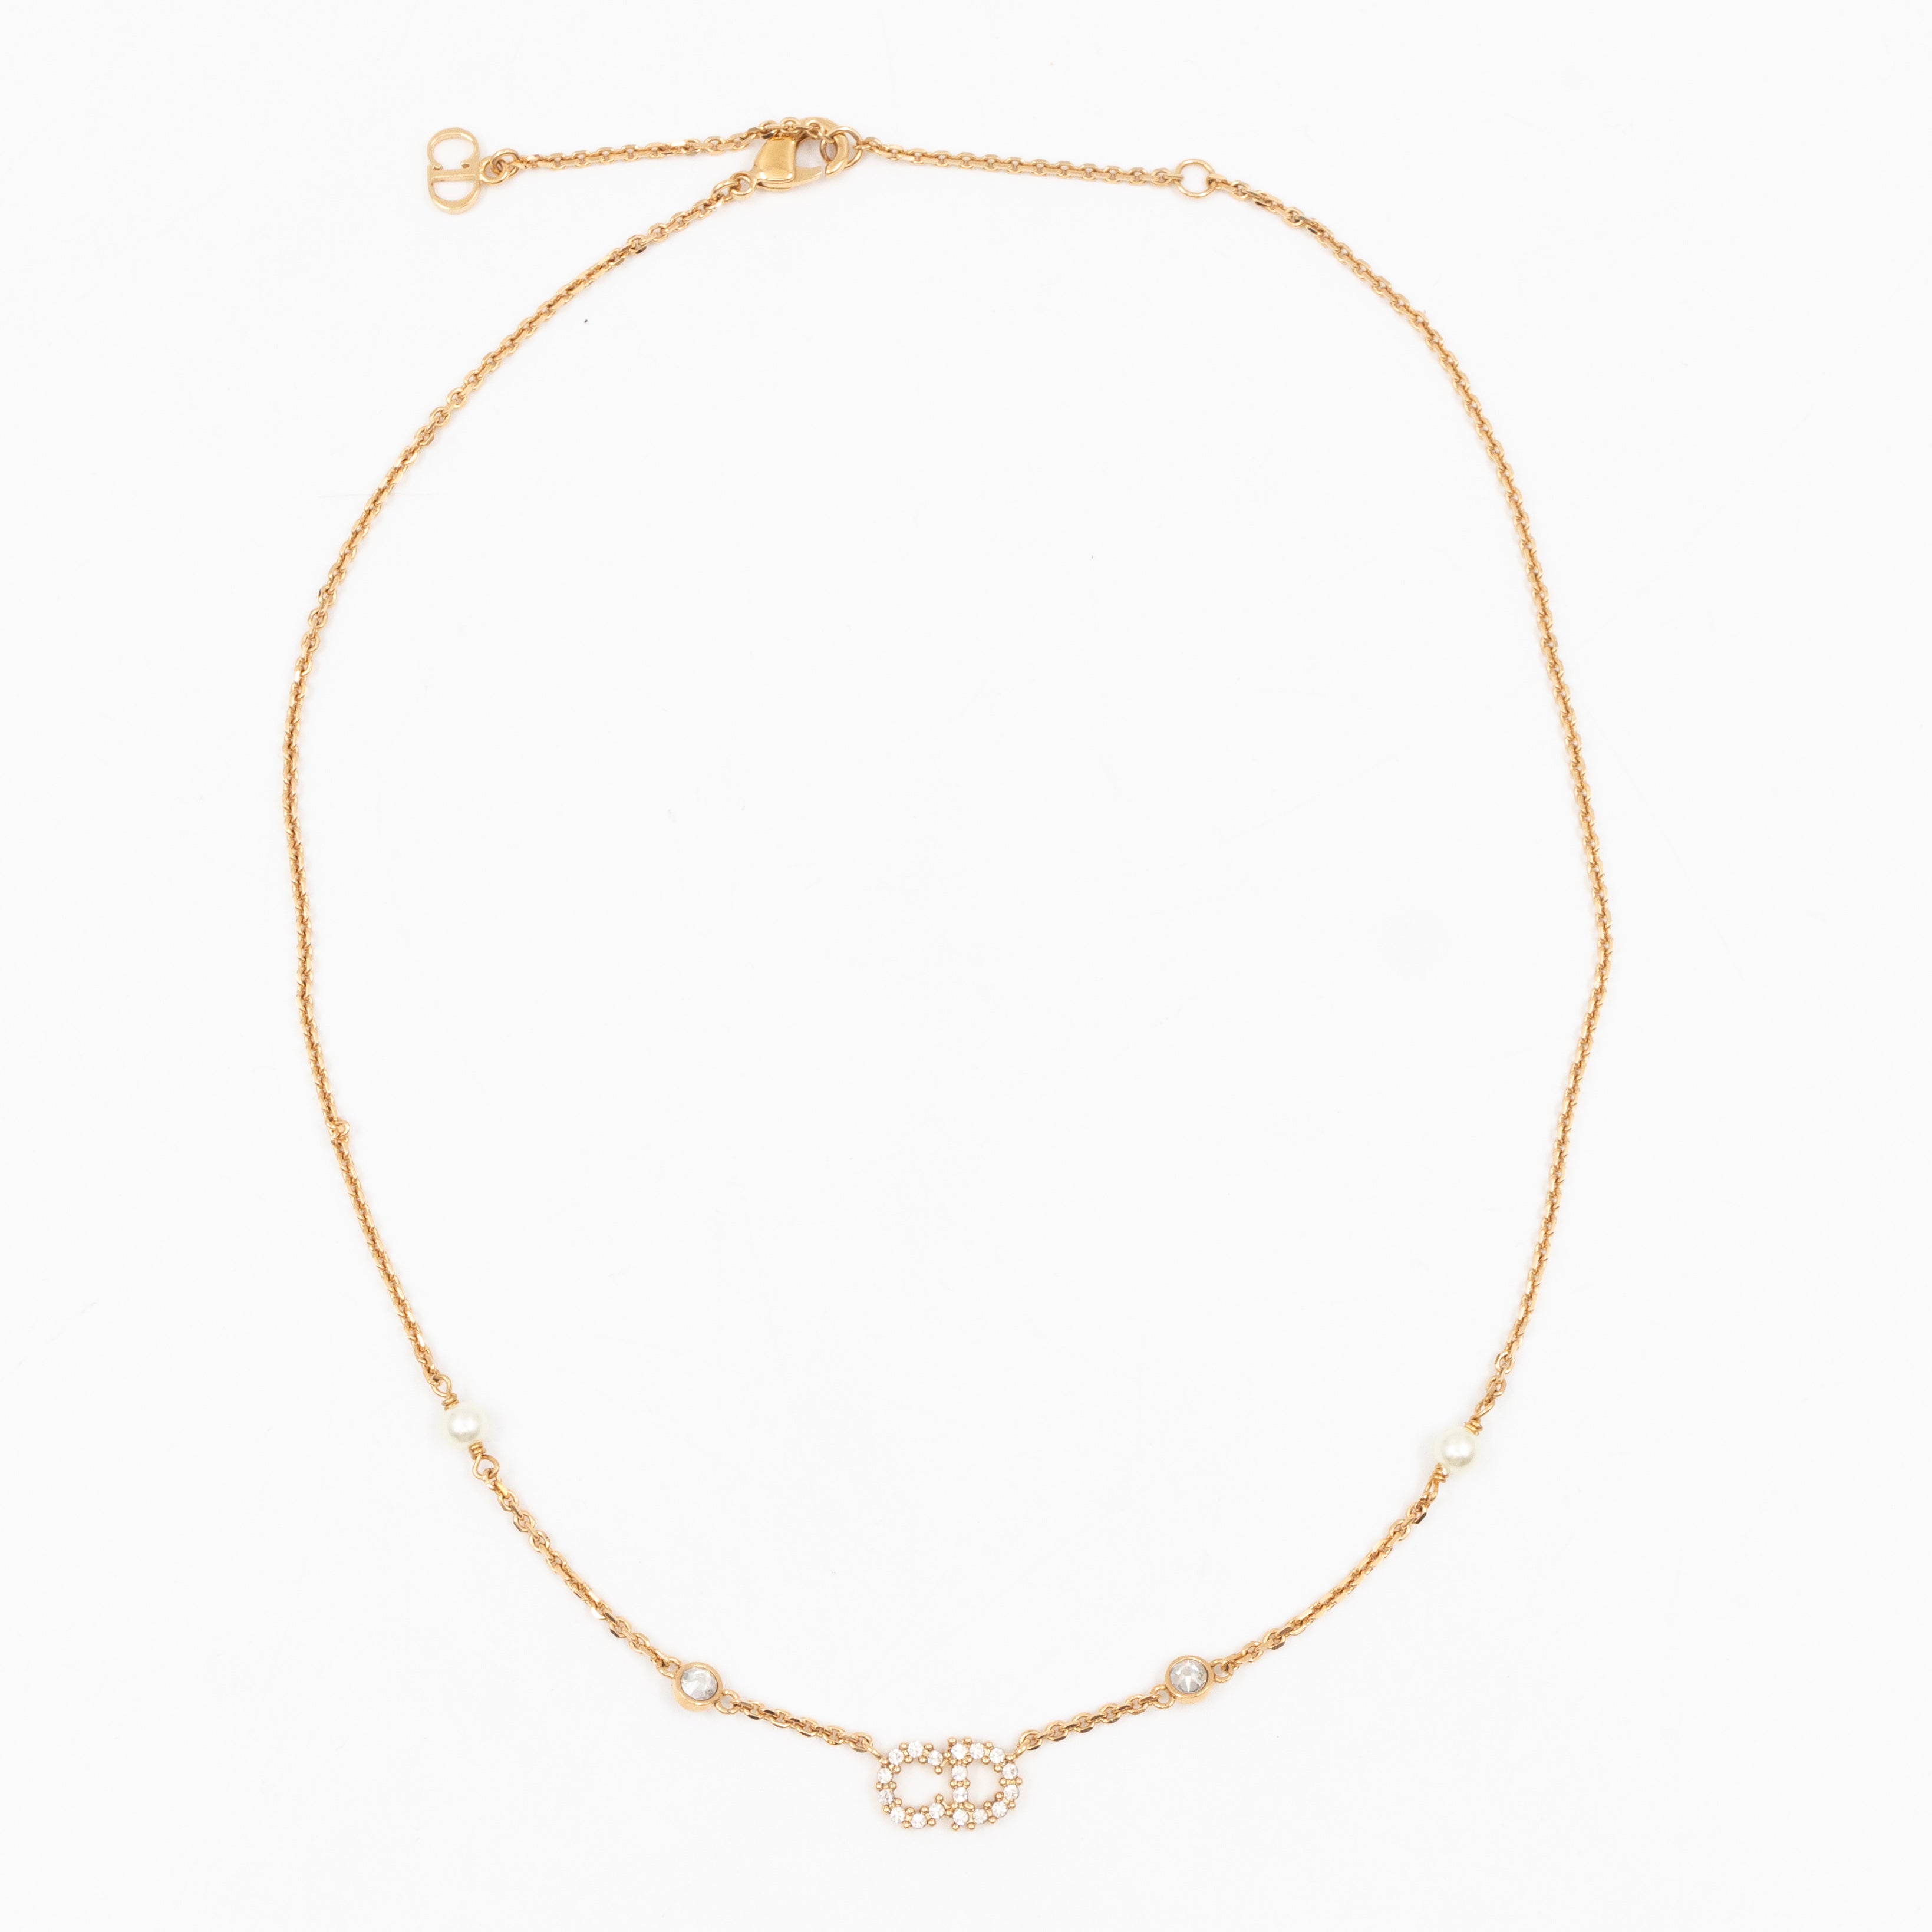 Shopybuybuybuy - Dior CLAIR D LUNE NECKLACE rm2430 | Facebook